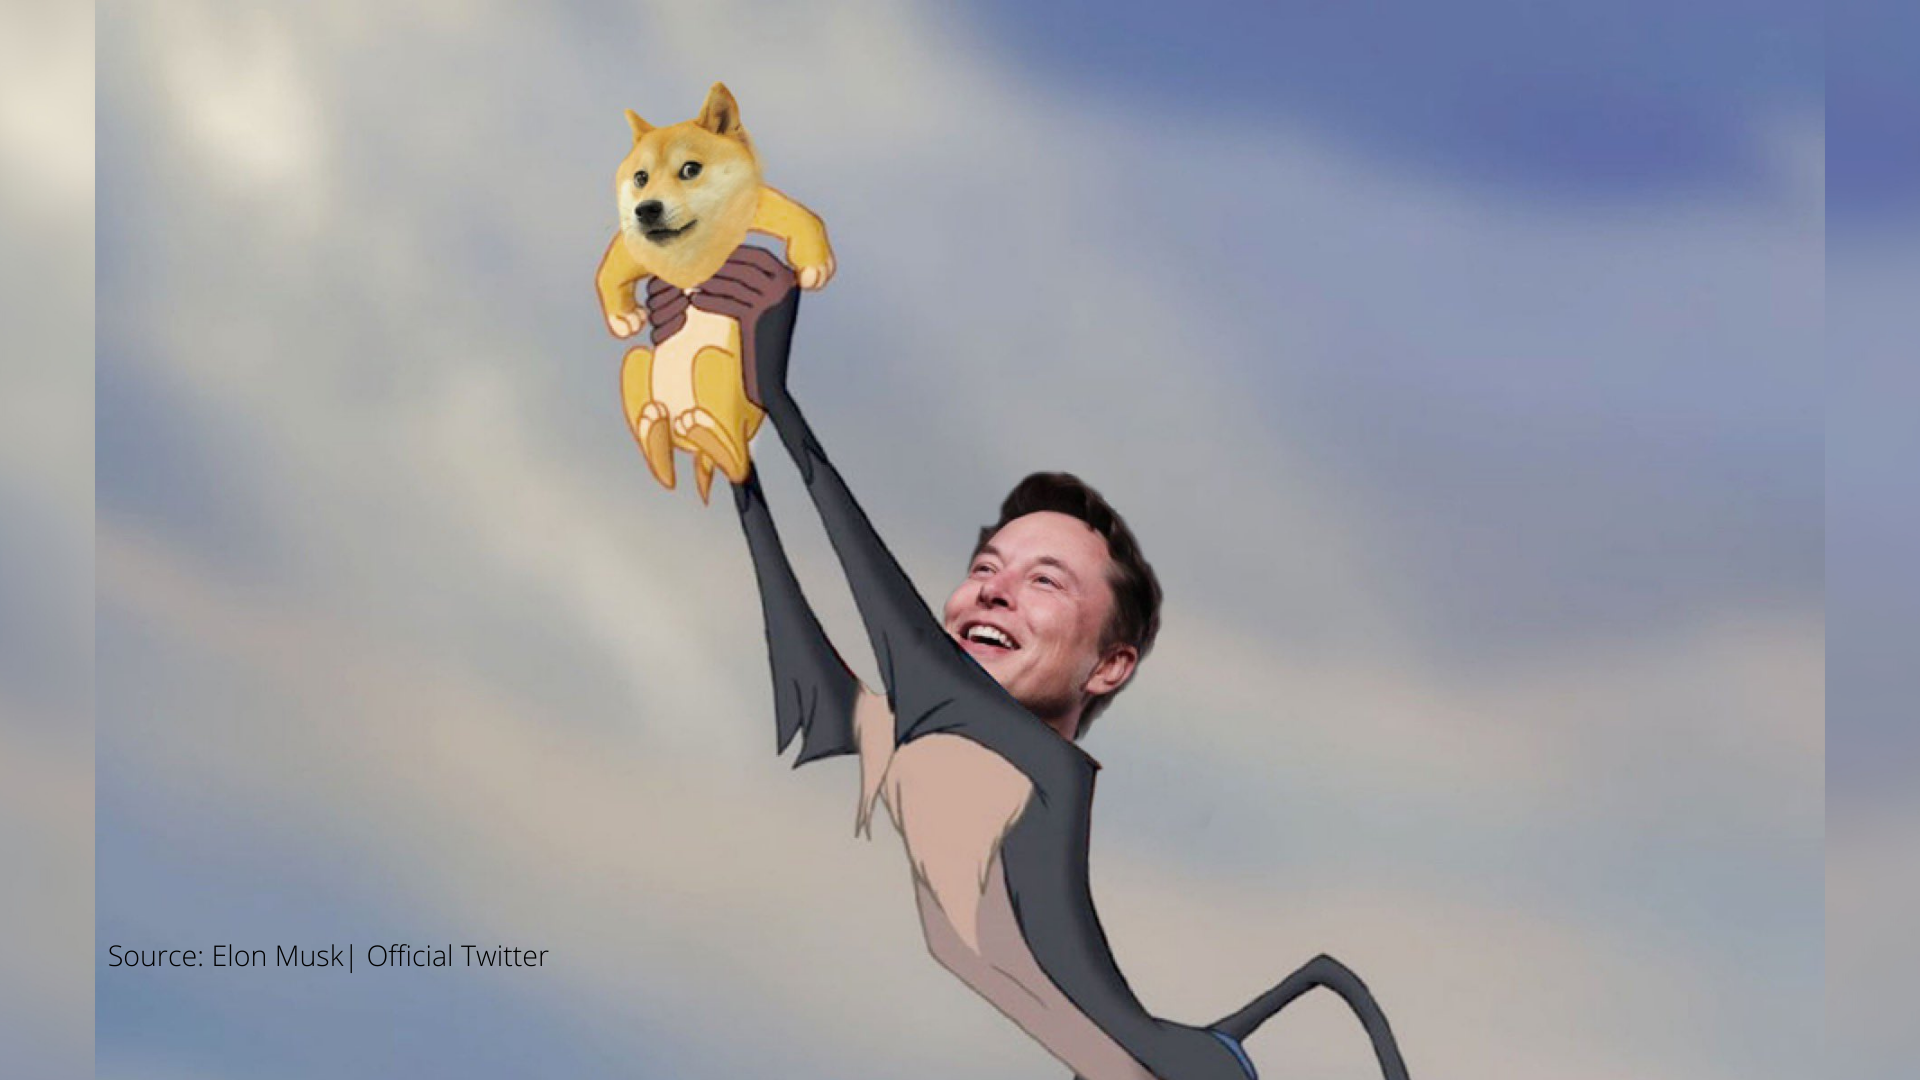 Elon Musk Returns to Twitter to Endorse Dogecoin and He is Now a Meme